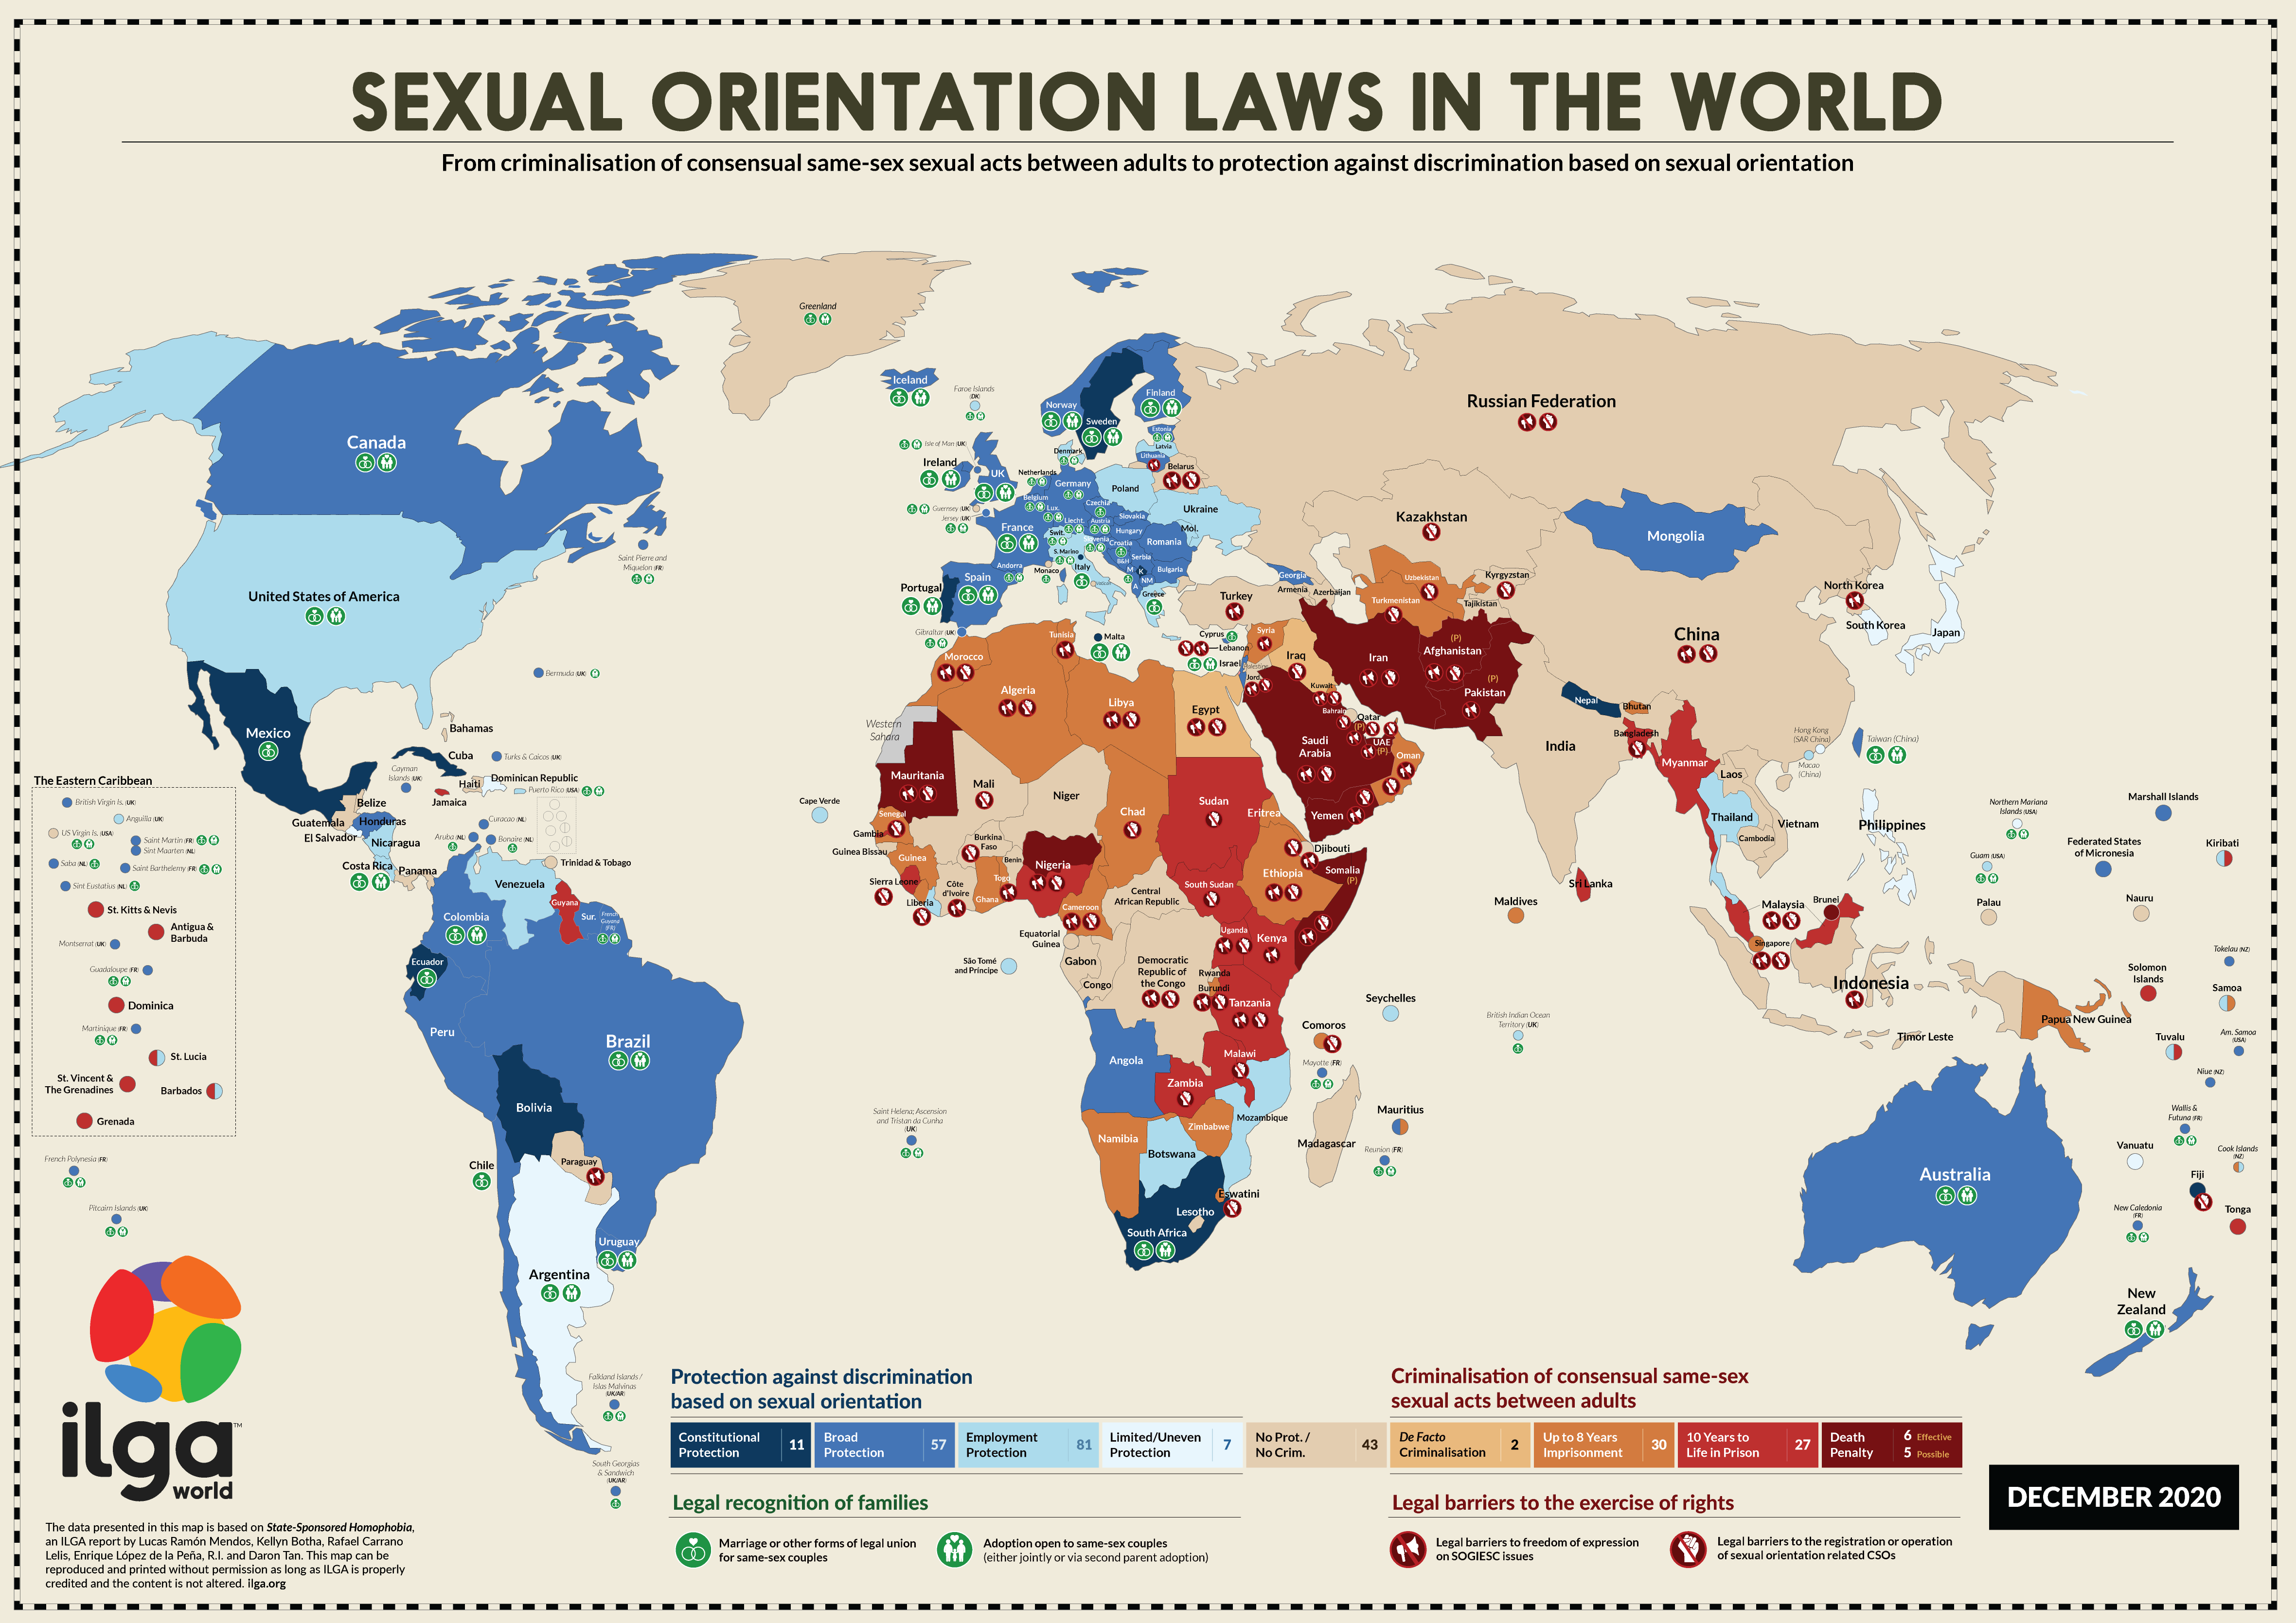 Map of Sexual Orientation Laws in the World. Credits to; ILGA World